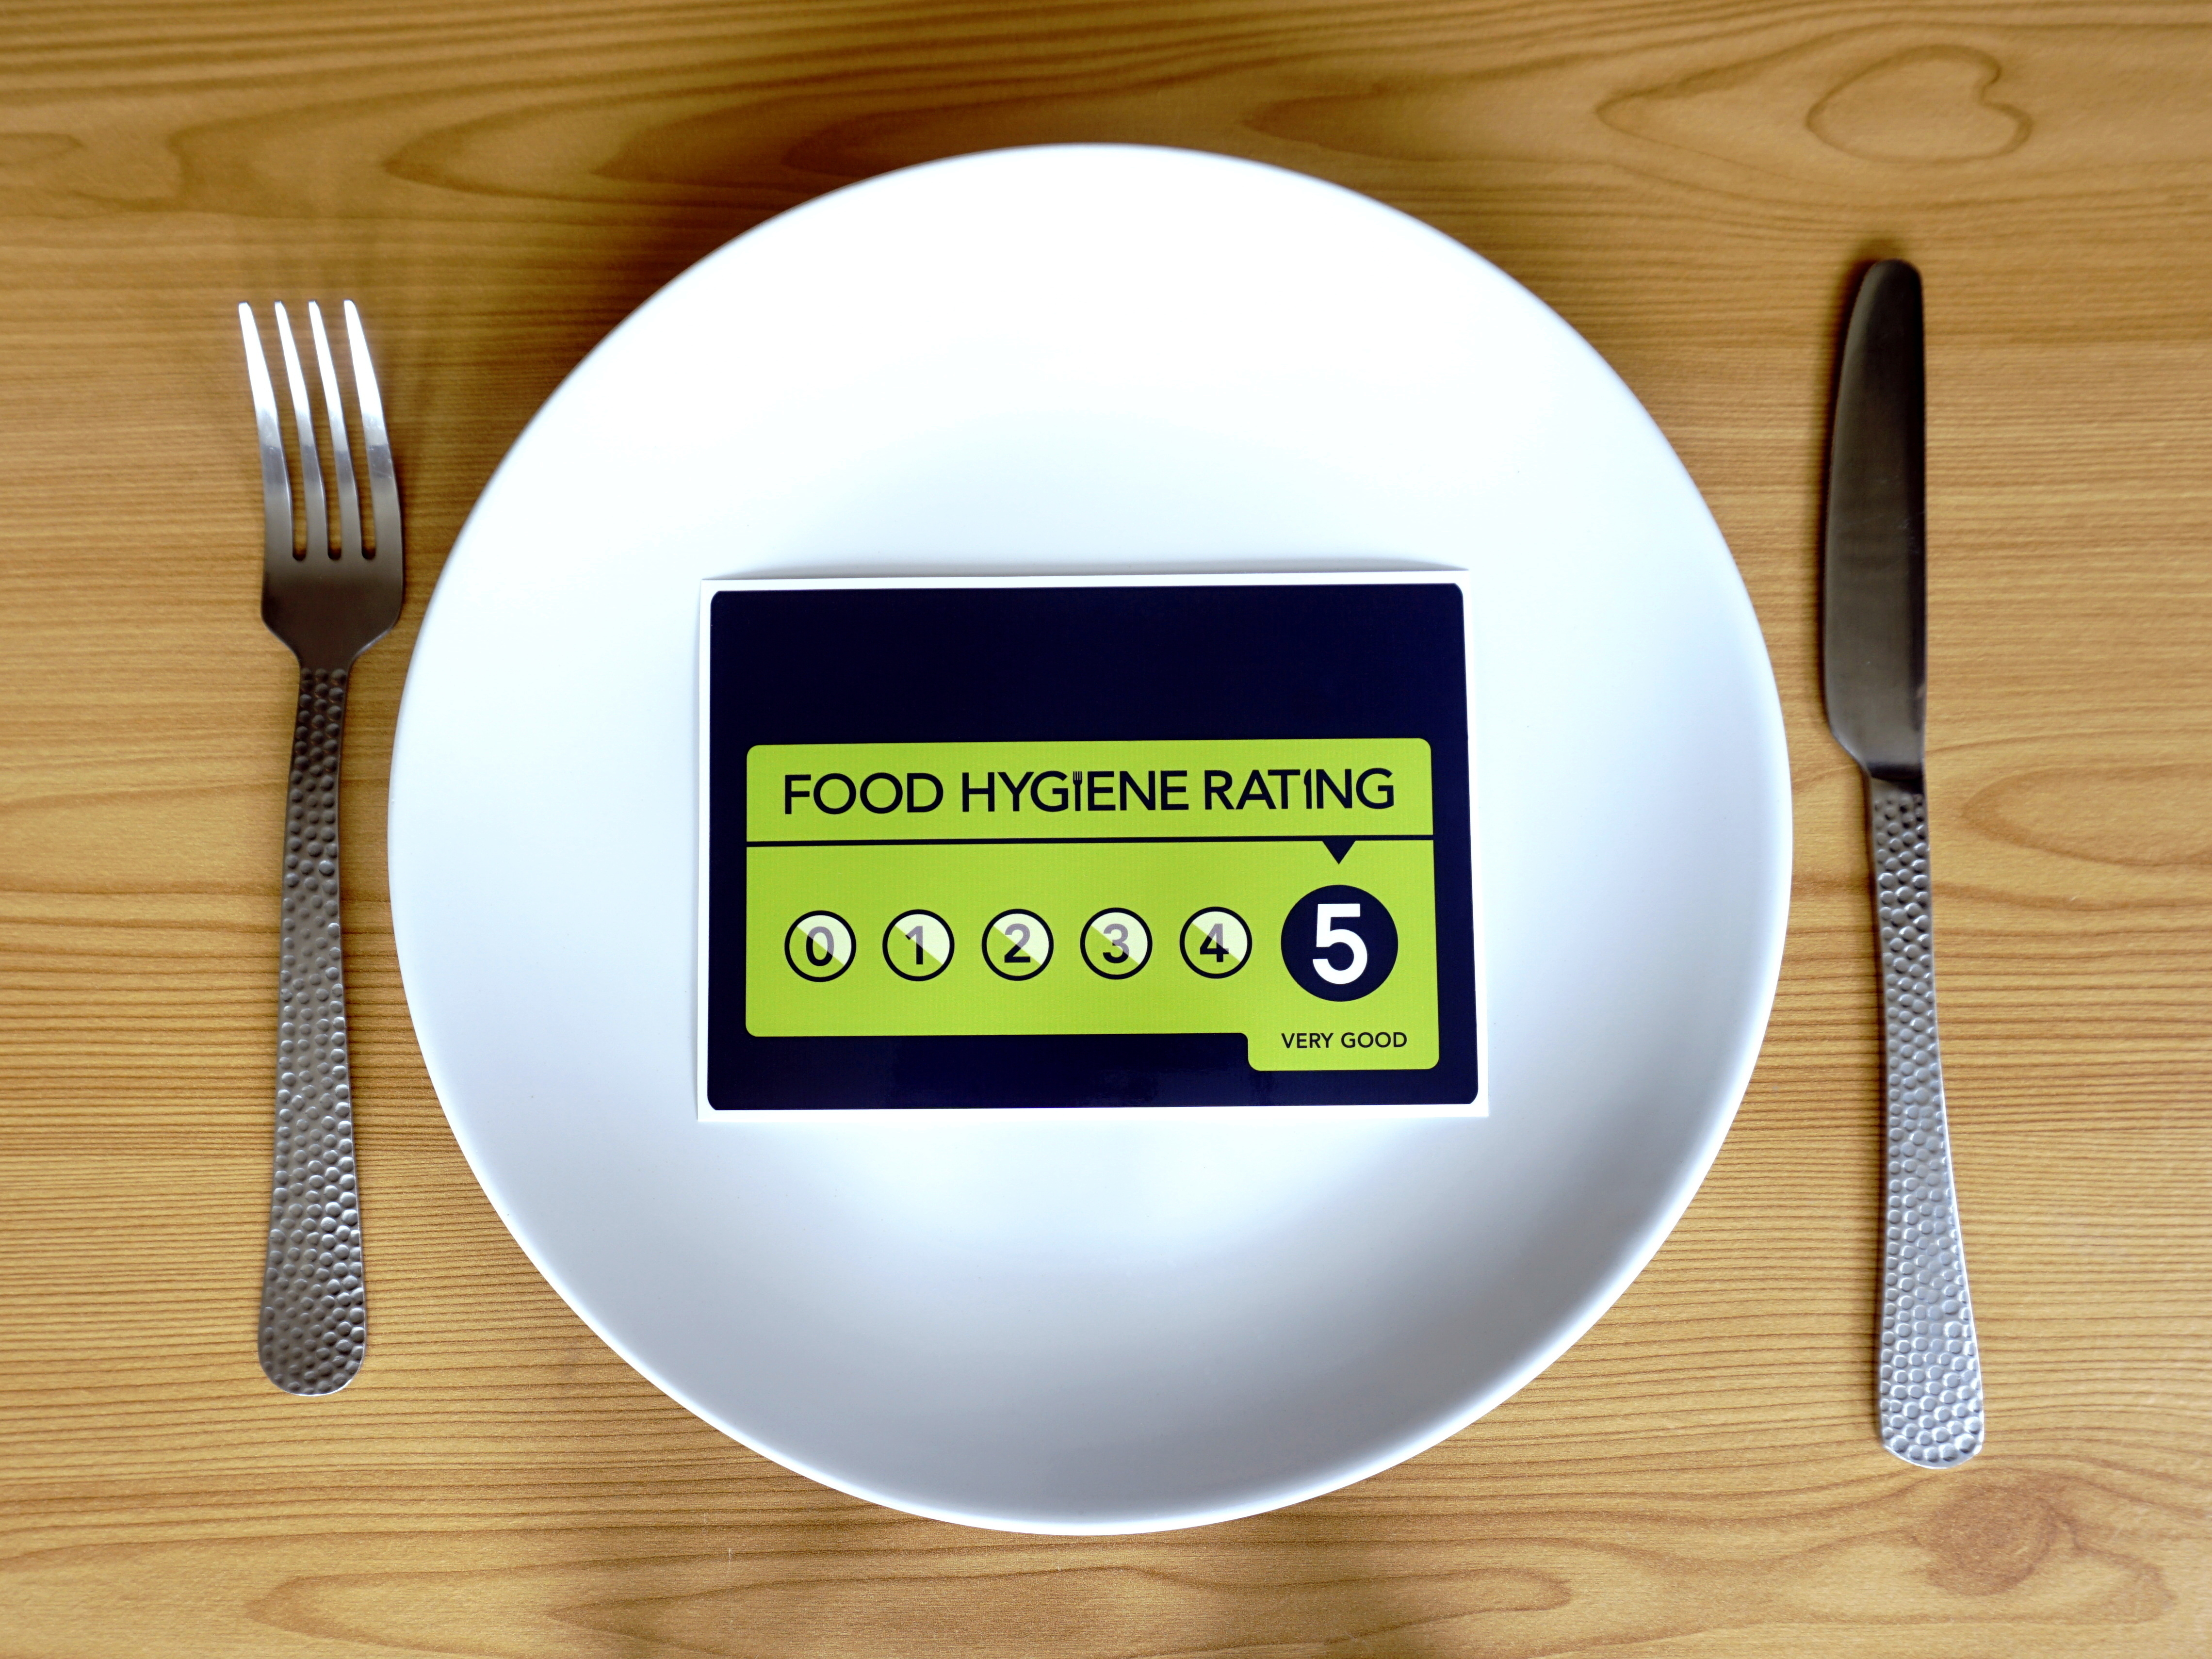 Lichfield District's residents can check the food hygiene rating of every business at the Food Standards Agency website.